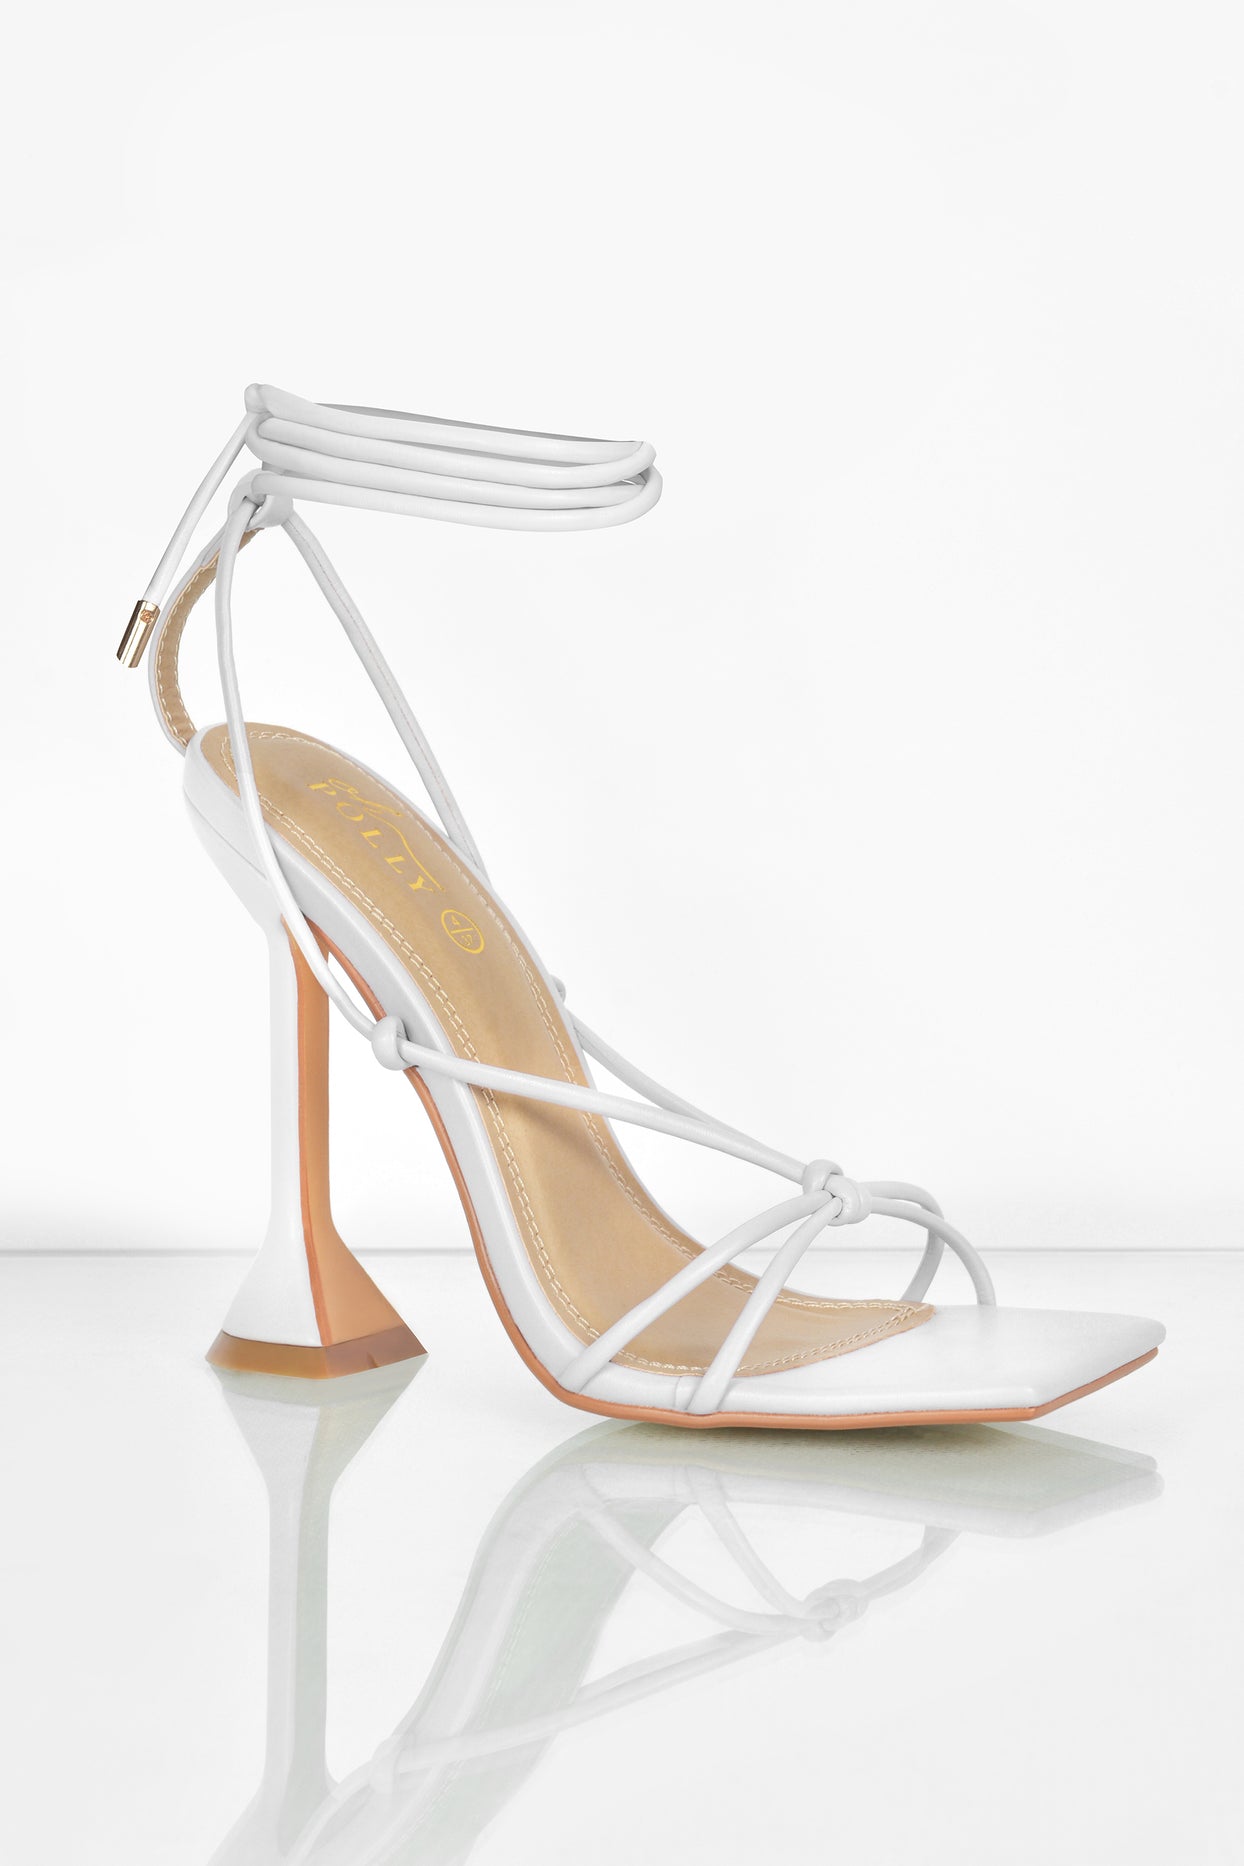 Lace It Up Strappy Lace Up Heels in White